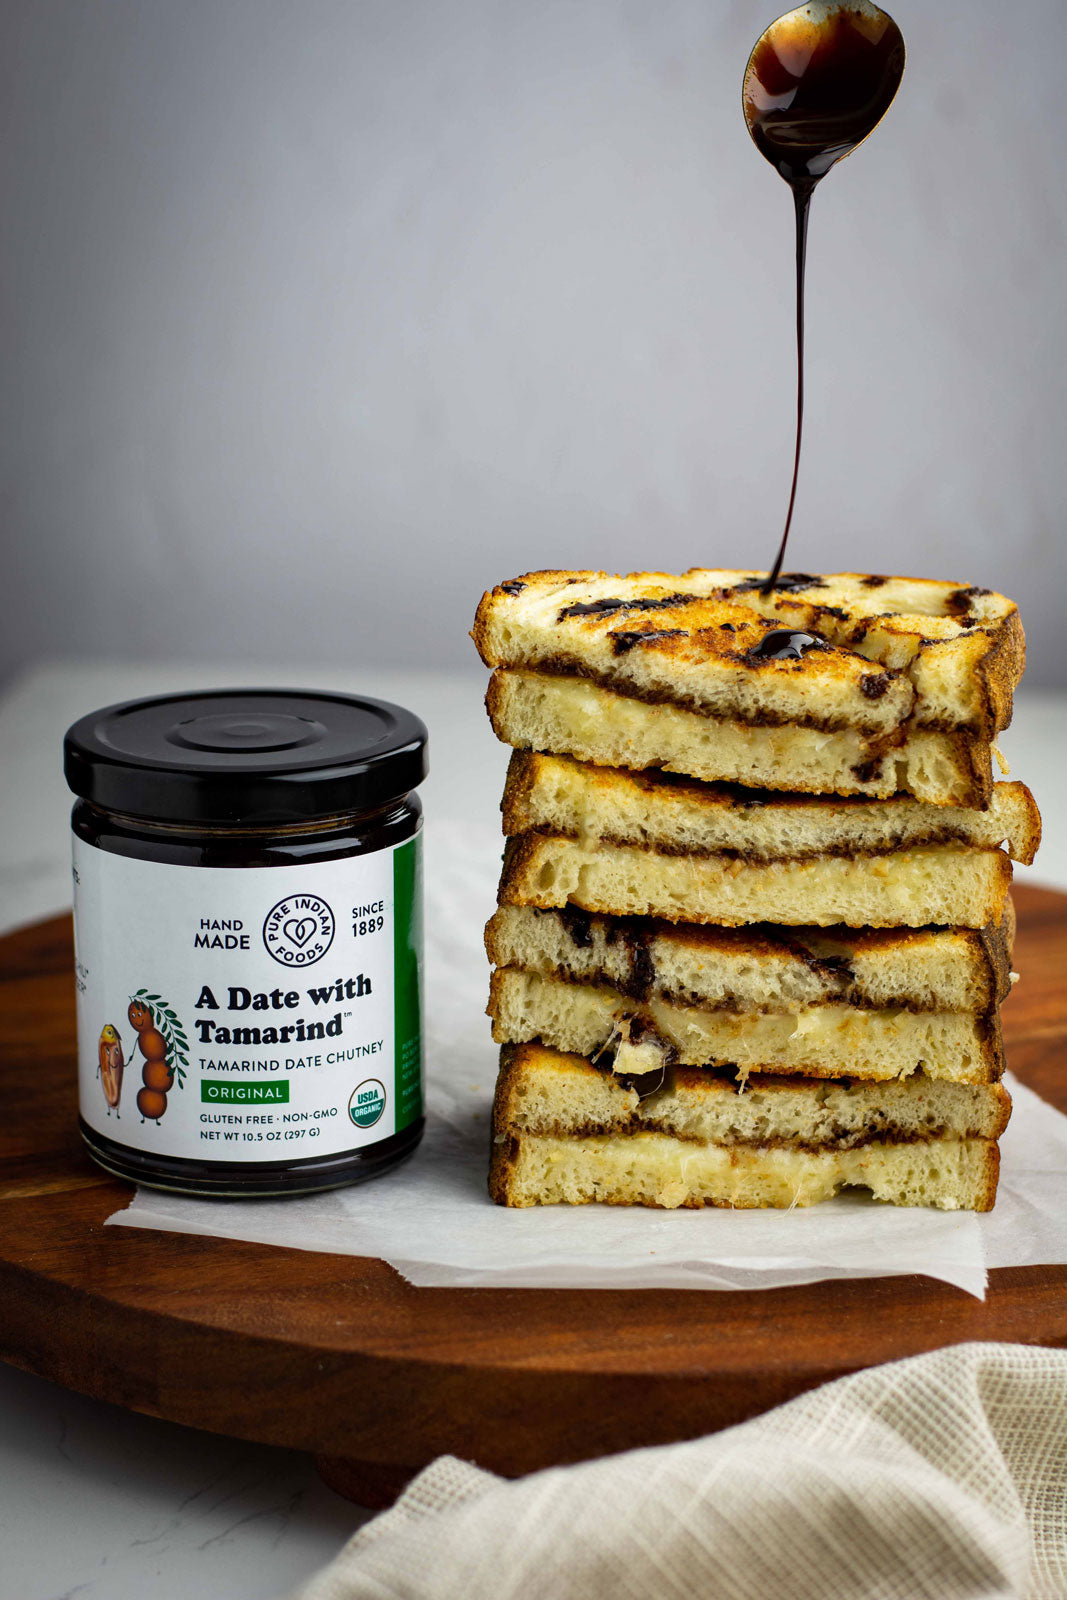 Grilled cheese on toast drizzled with the organic tamarind date chutney from Pure Indian Foods